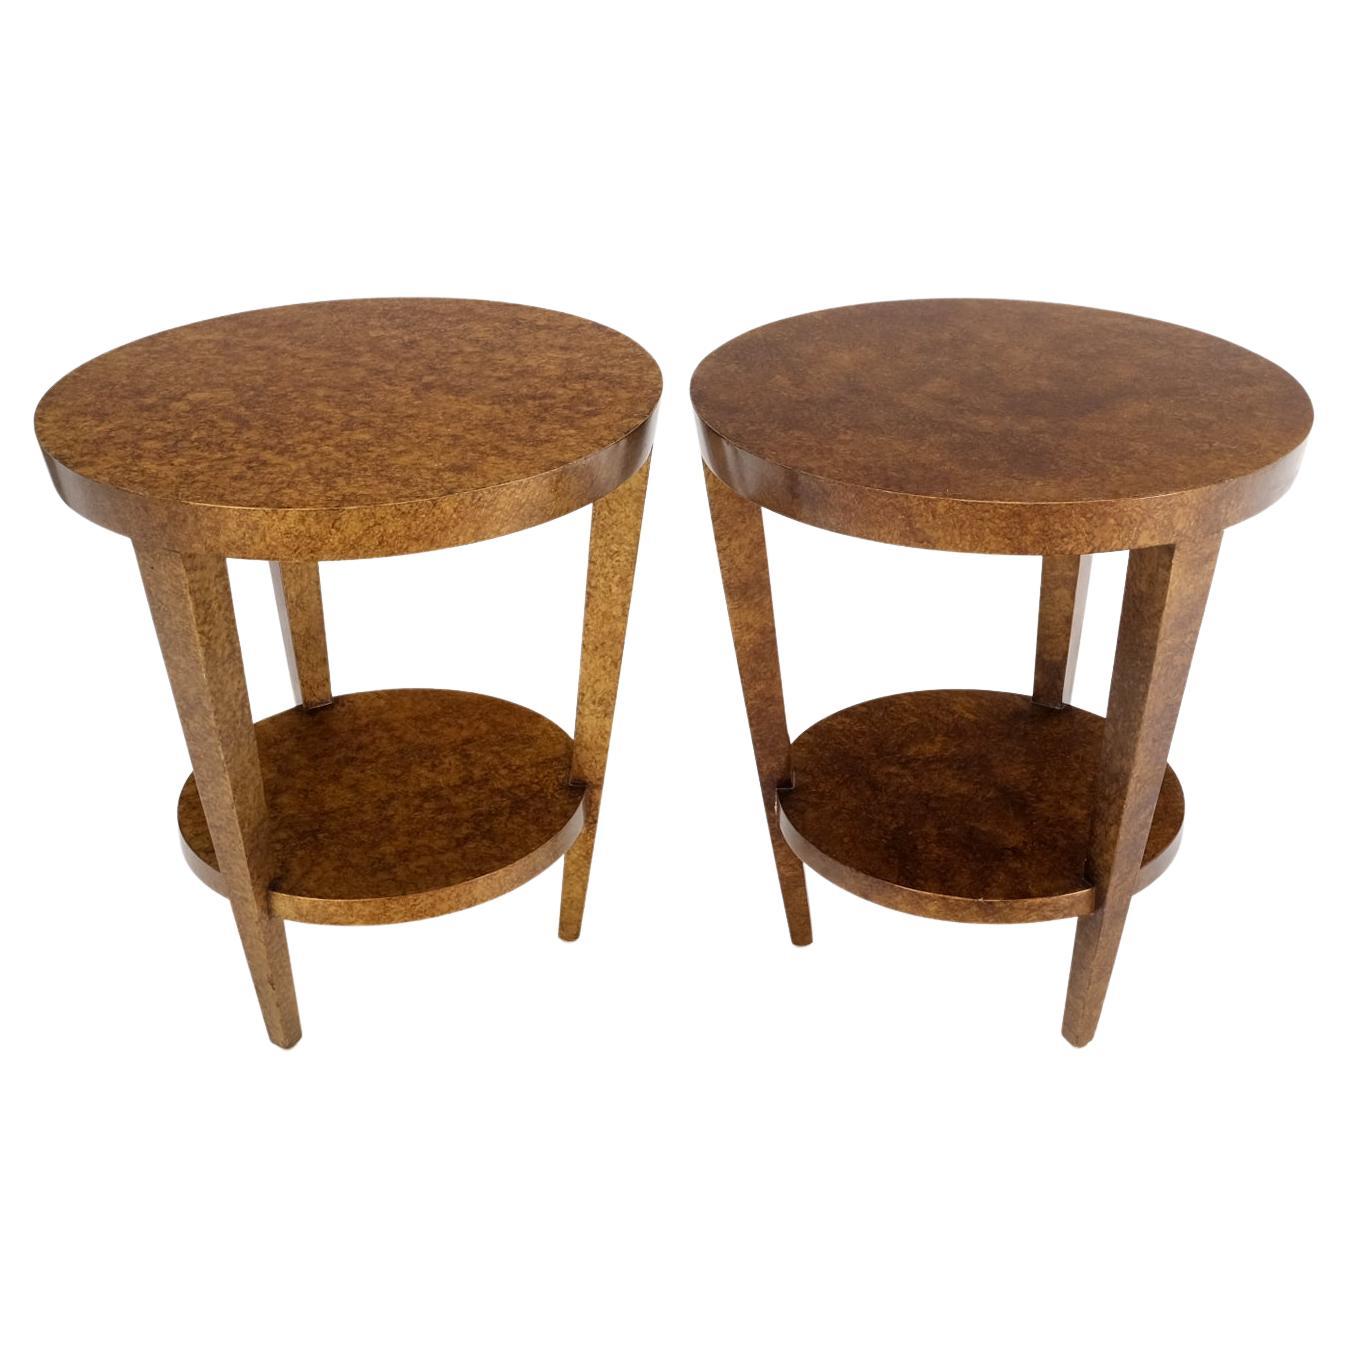 Pair of Round Two Tier Tortoiseshell Side End Tables Stands Pedestals